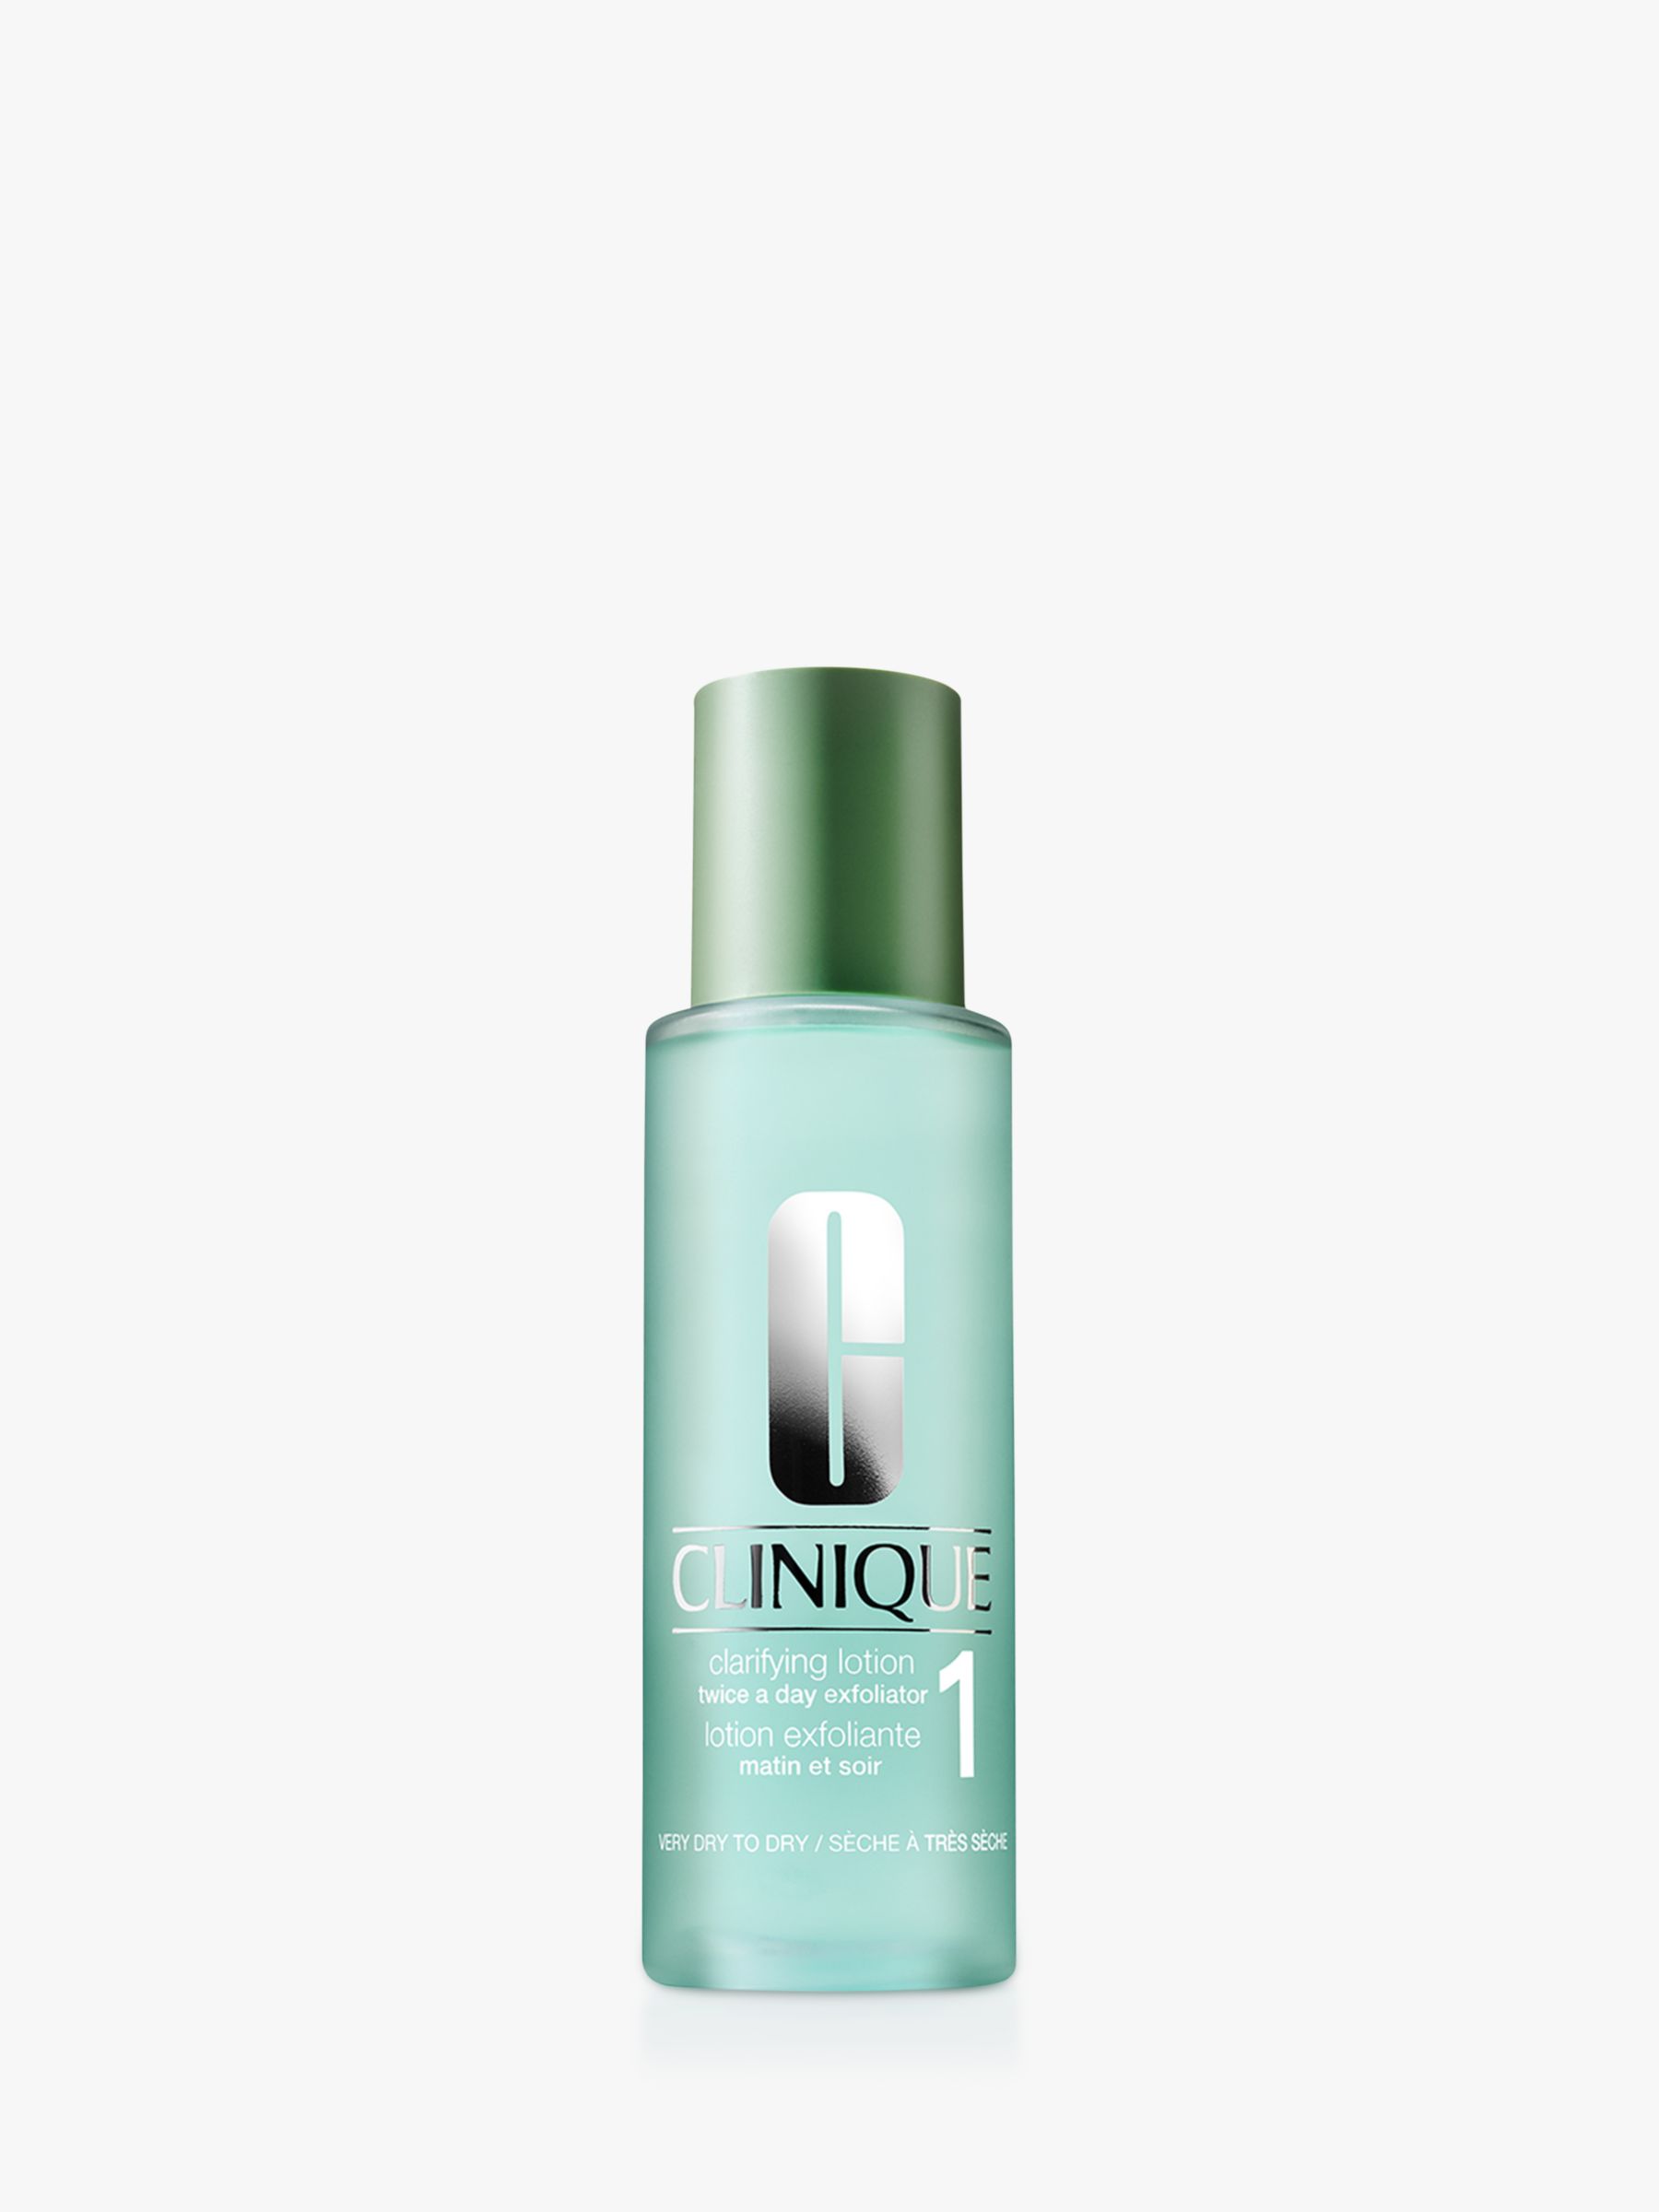 Clinique Clarifying Lotion 1 - Very Dry to Dry Skin Types, 400ml 1